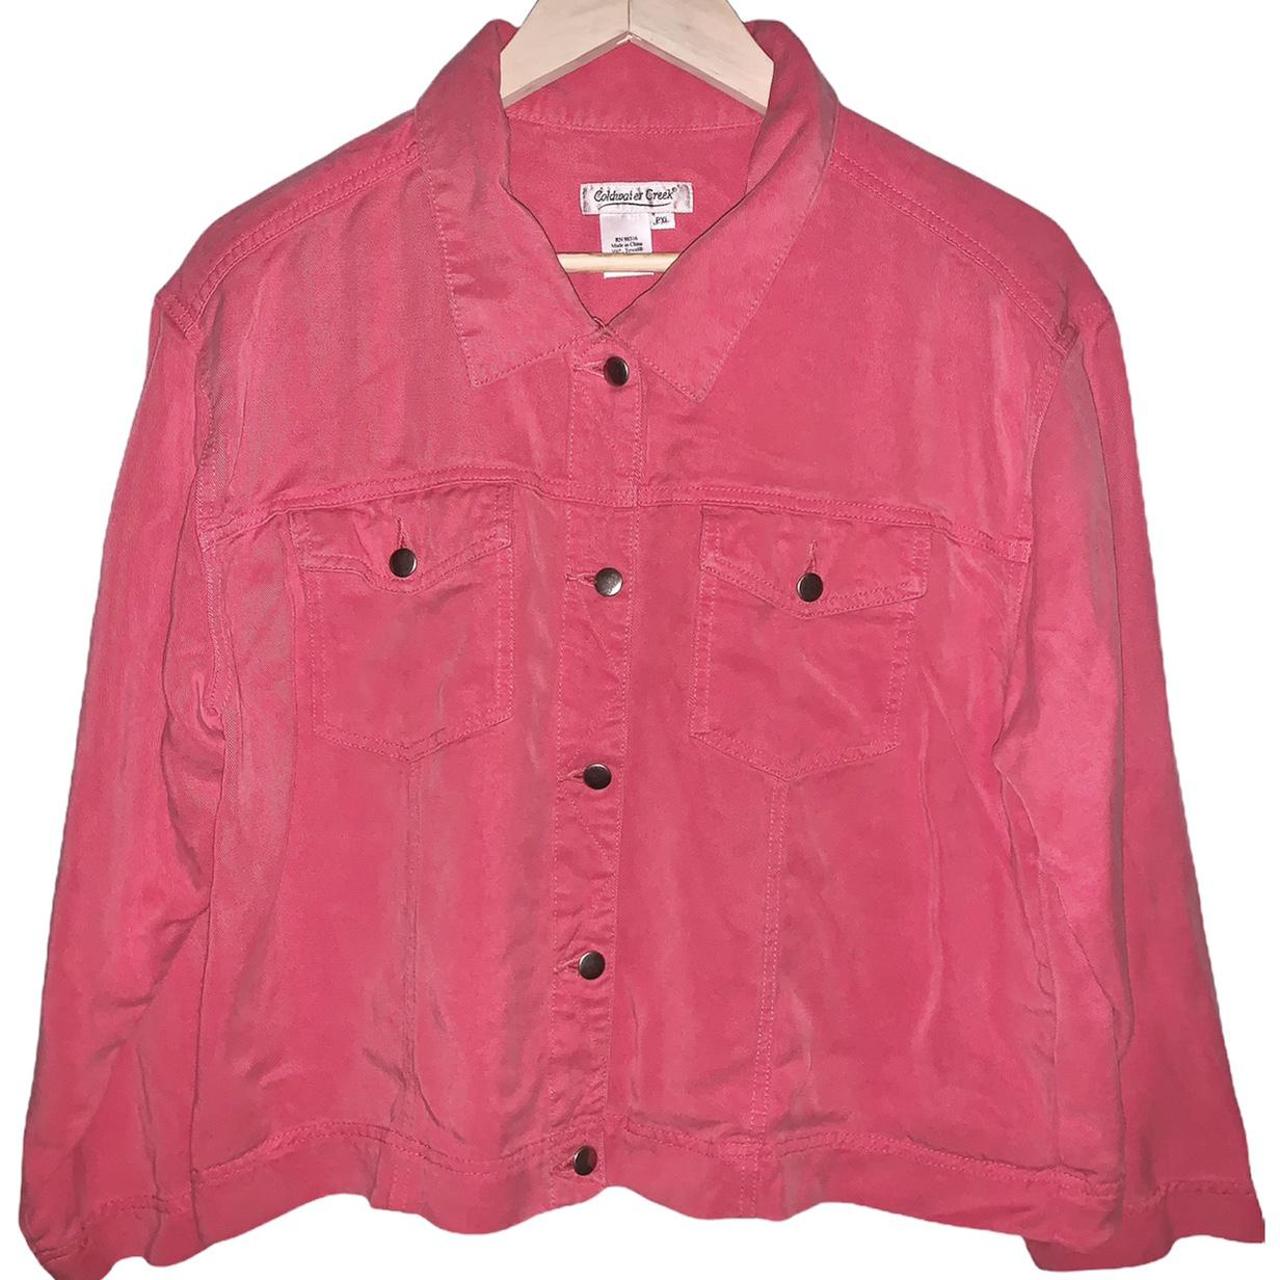 Product Image 1 - Bright Coral Pink Lightweight Button